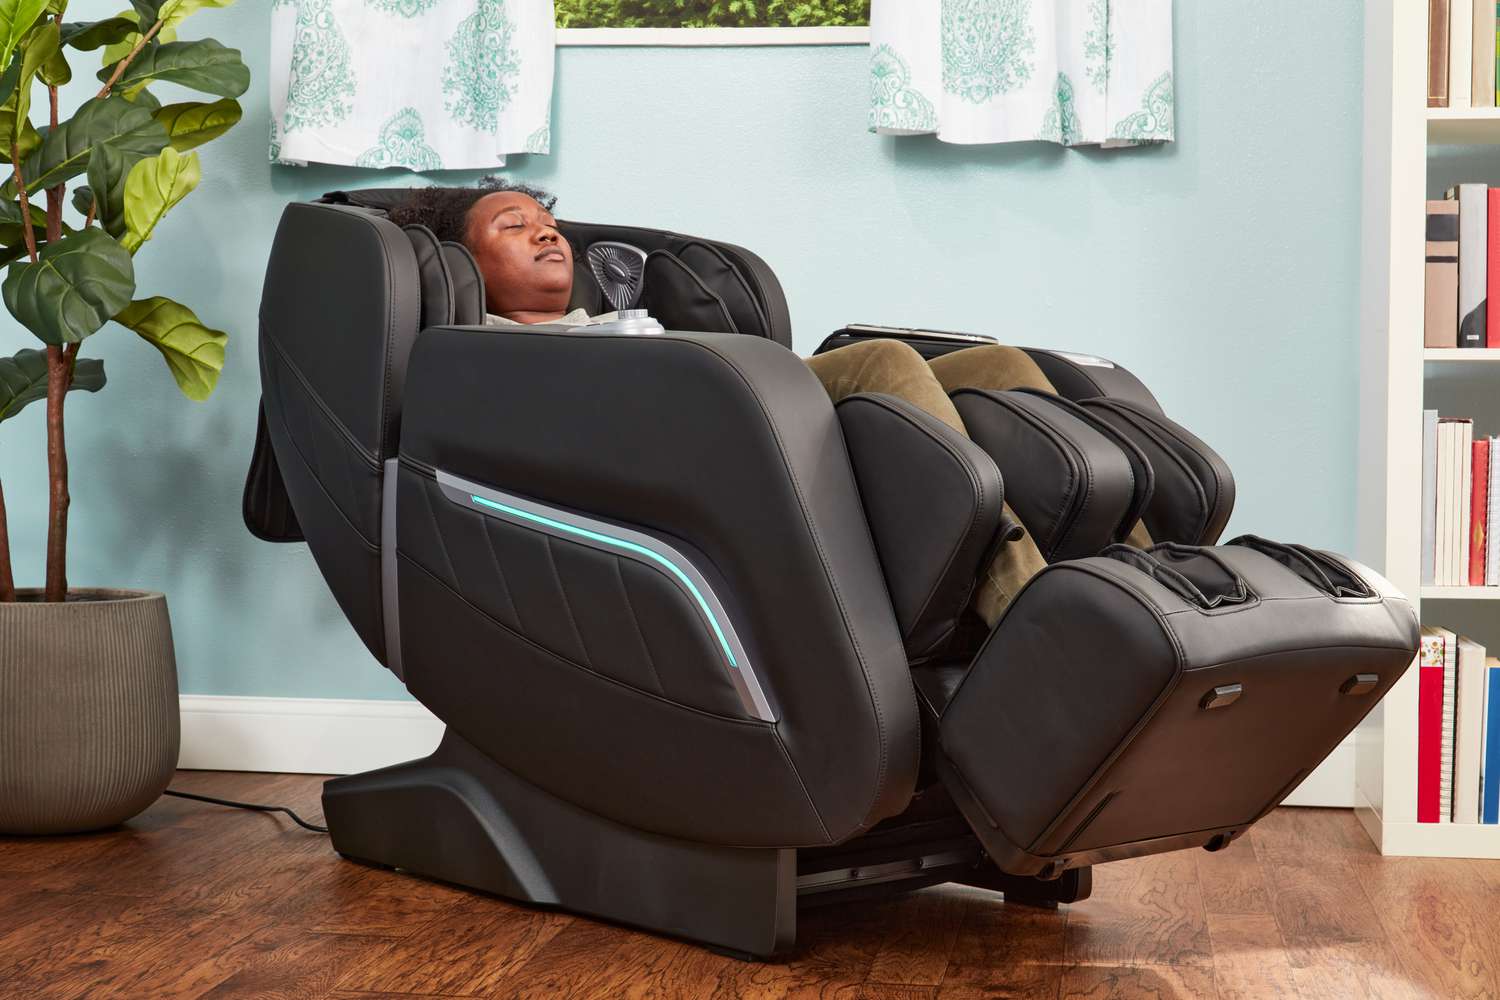 A person reclines in an iRest Zero Gravity Massage Chair in a blue room